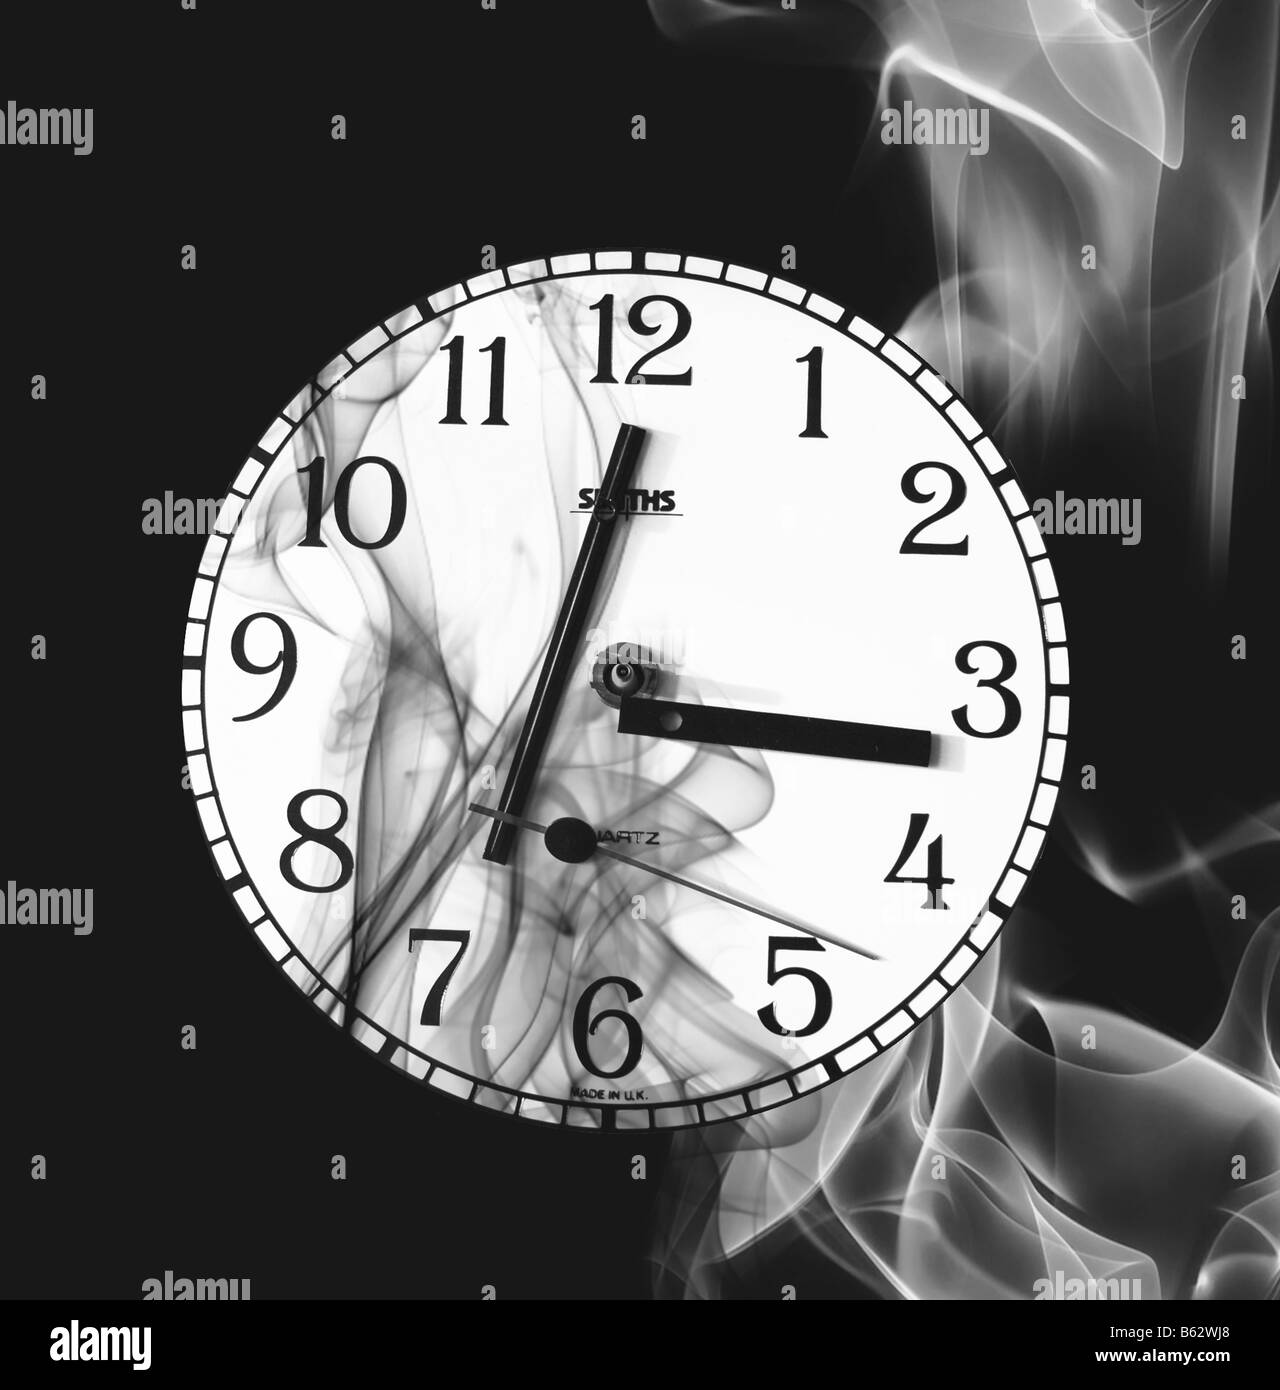 A clock face with disconnected time hands and with plumes of smoke surrounding it. Stock Photo